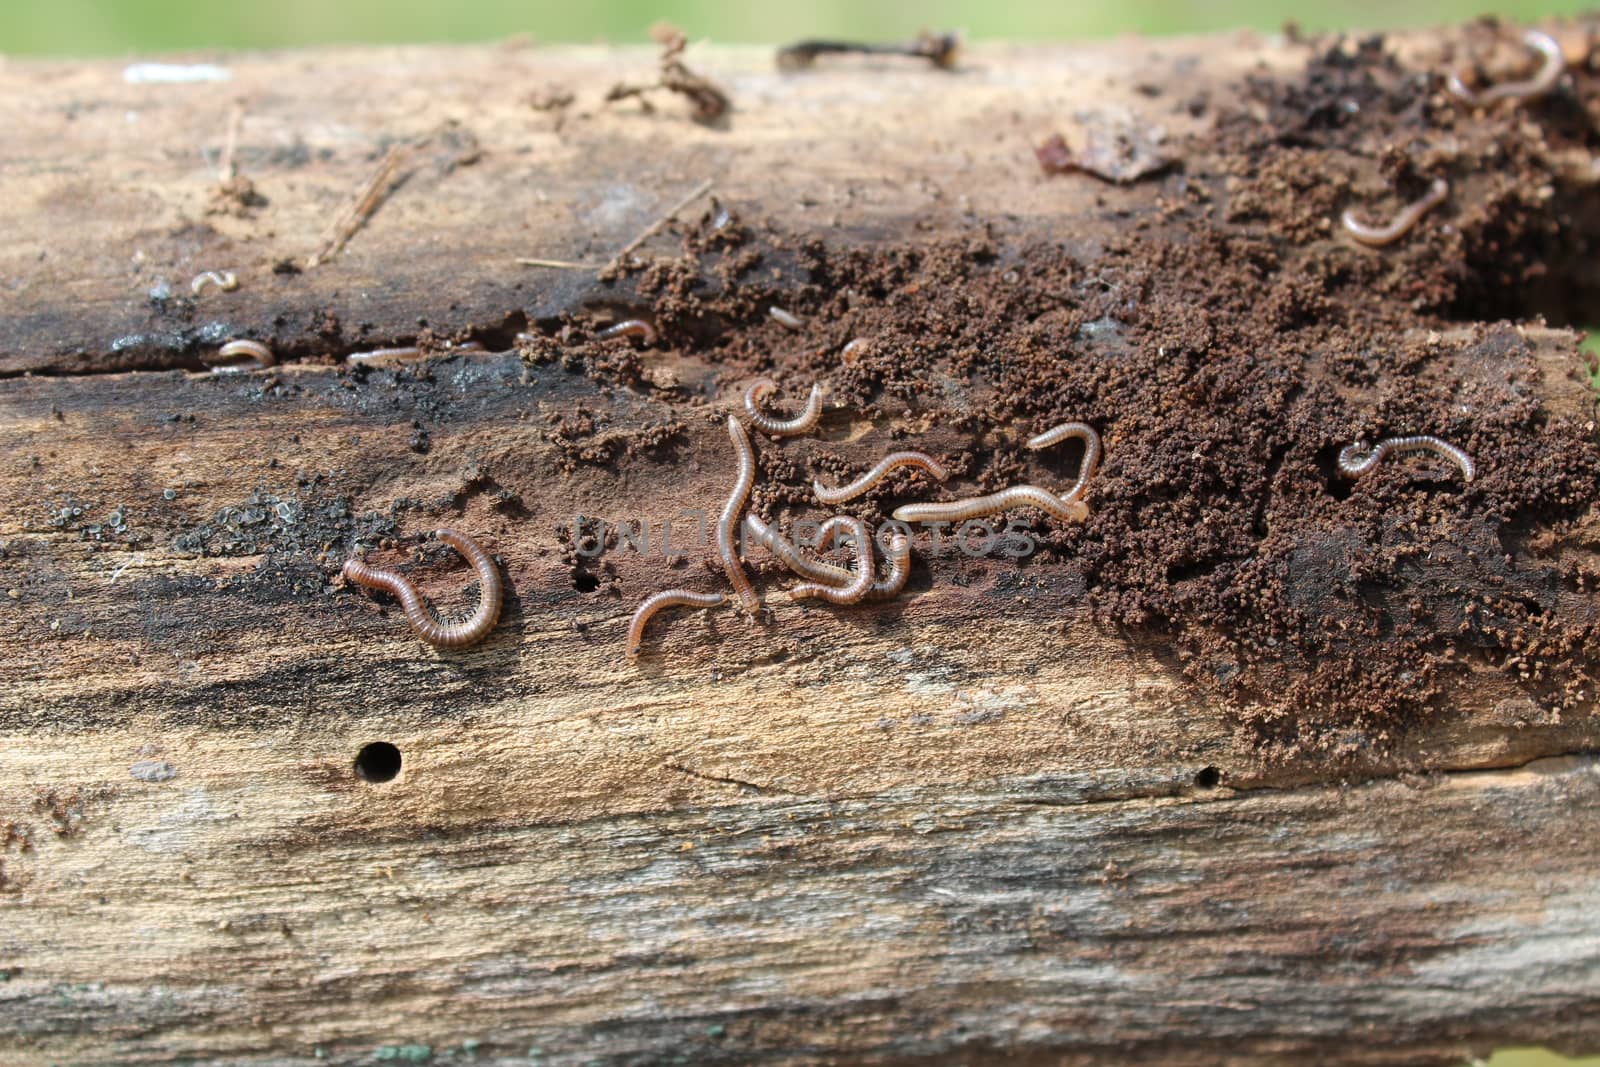 The picture shows little millepedes on weathered wood